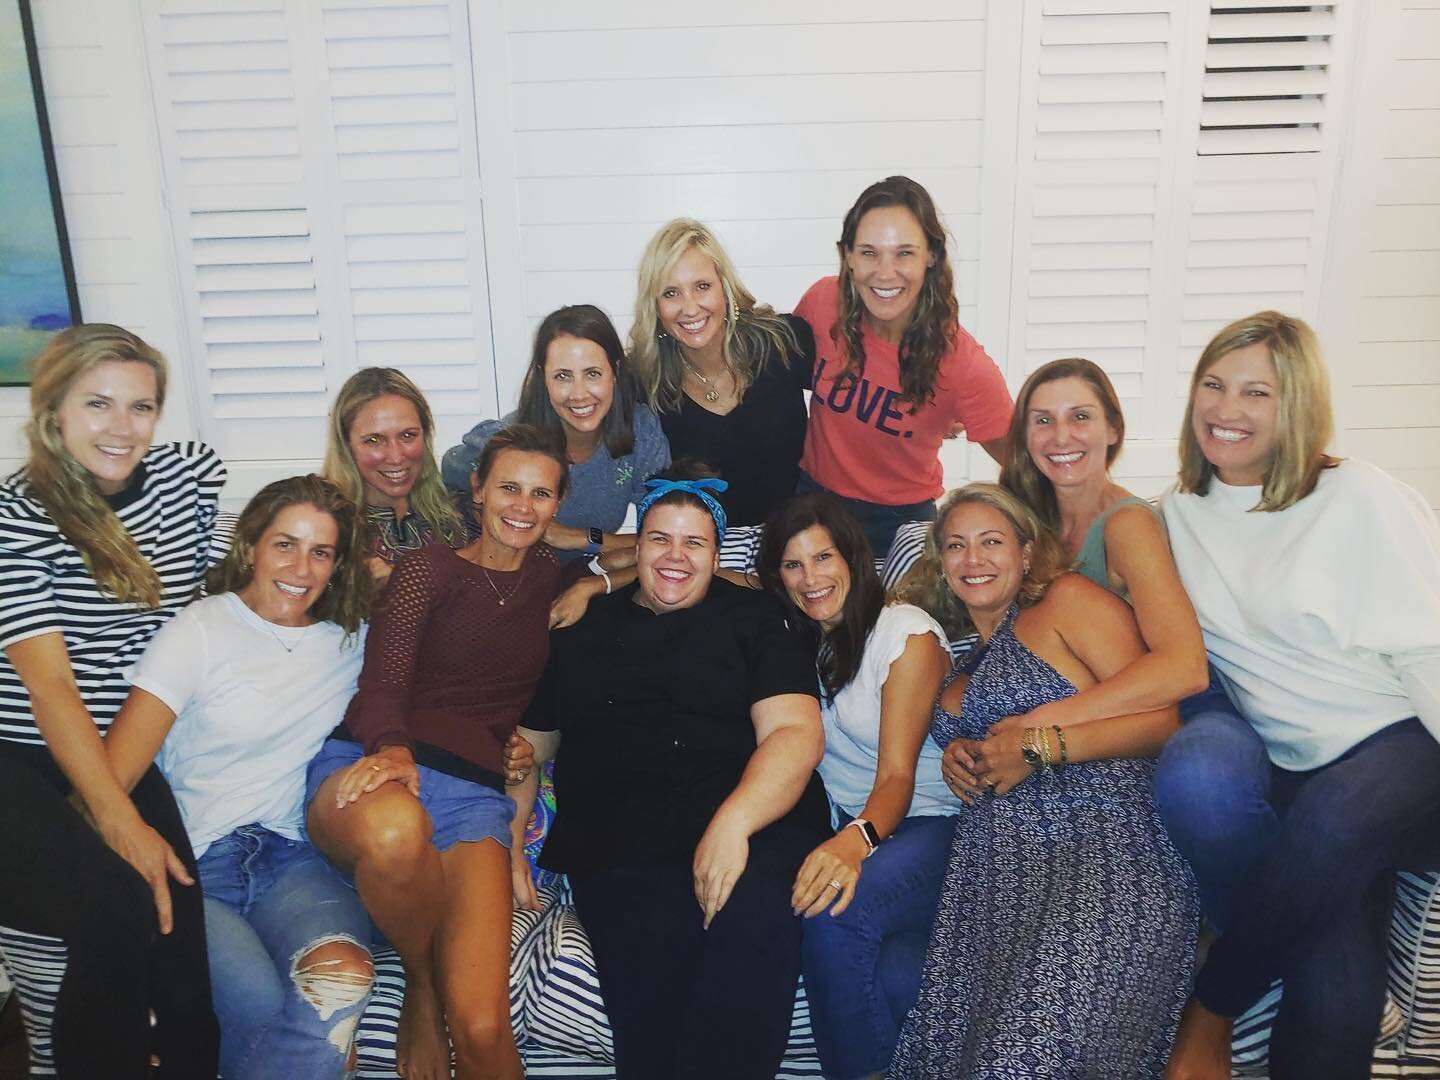 Simply the best! What a fun filled Saturday evening we had with these ladies 💃💃💃 I didn&rsquo;t get to see them last year, but we did it up big this year! Always thankful to have repeat clients, especially when they&rsquo;re as great as this group